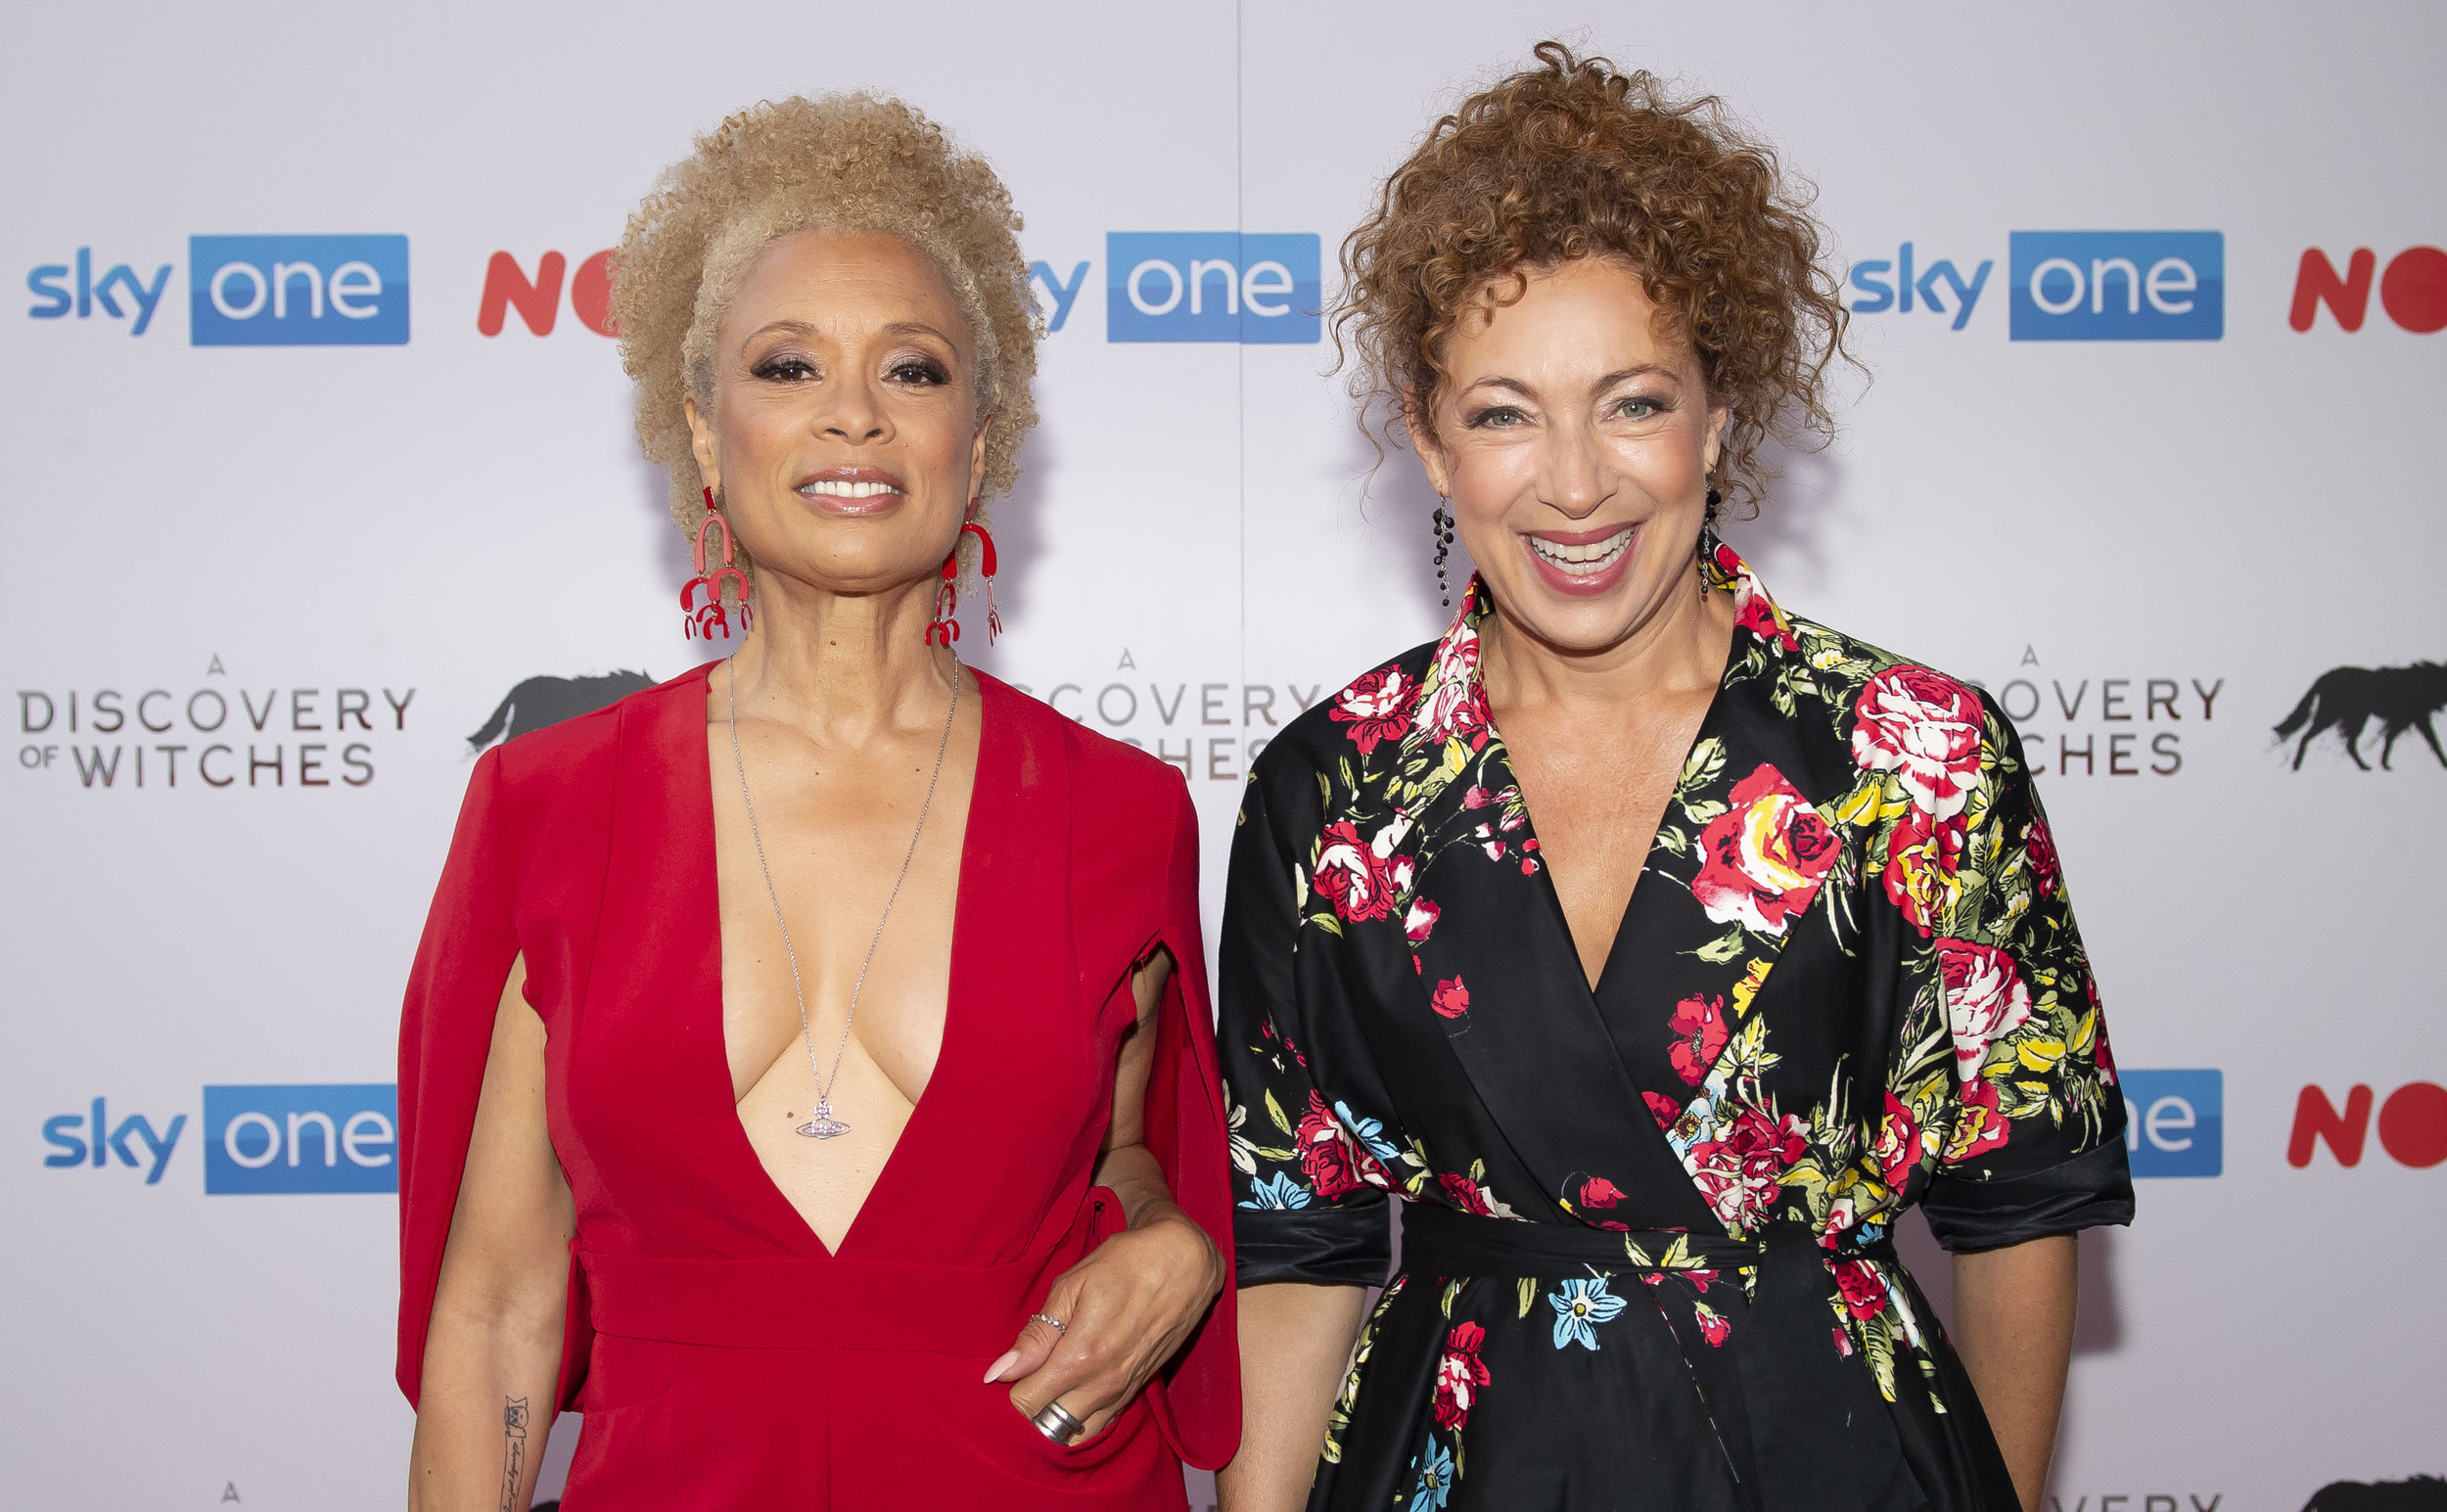  CARDIFF, WALES - SEPTEMBER 05: Valarie Pettiford and Alex Kingston attend the UK Premiere of 'A Discovery Of Witches' at Cineworld on September 5, 2018 in Cardiff, Wales. (Photo by Matthew Horwood/Getty Images) 